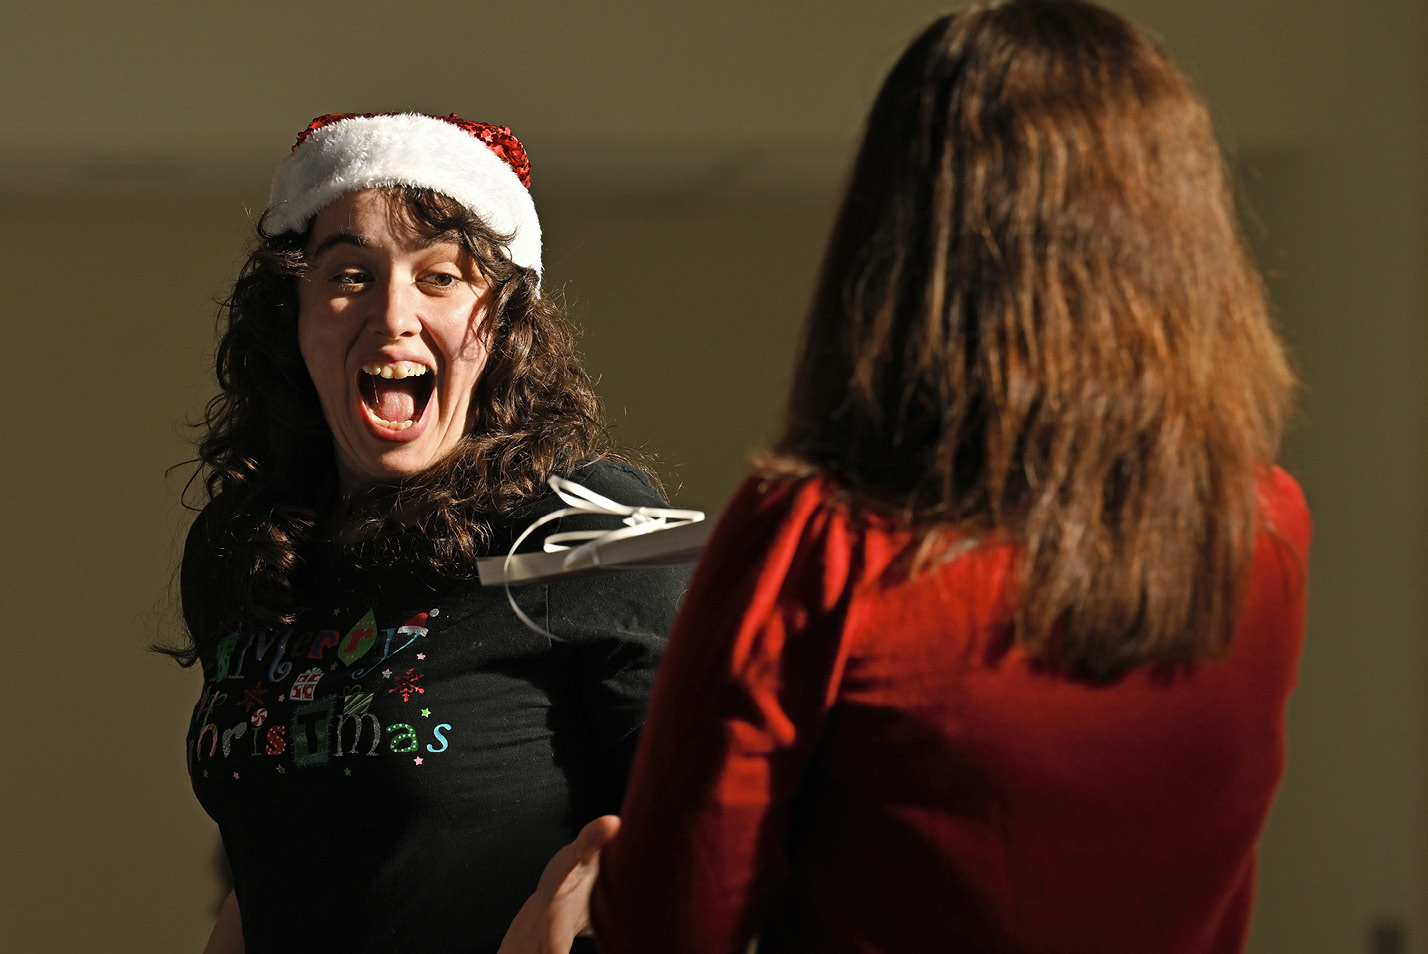 Staff member collecting a prize during the year-end holiday party.